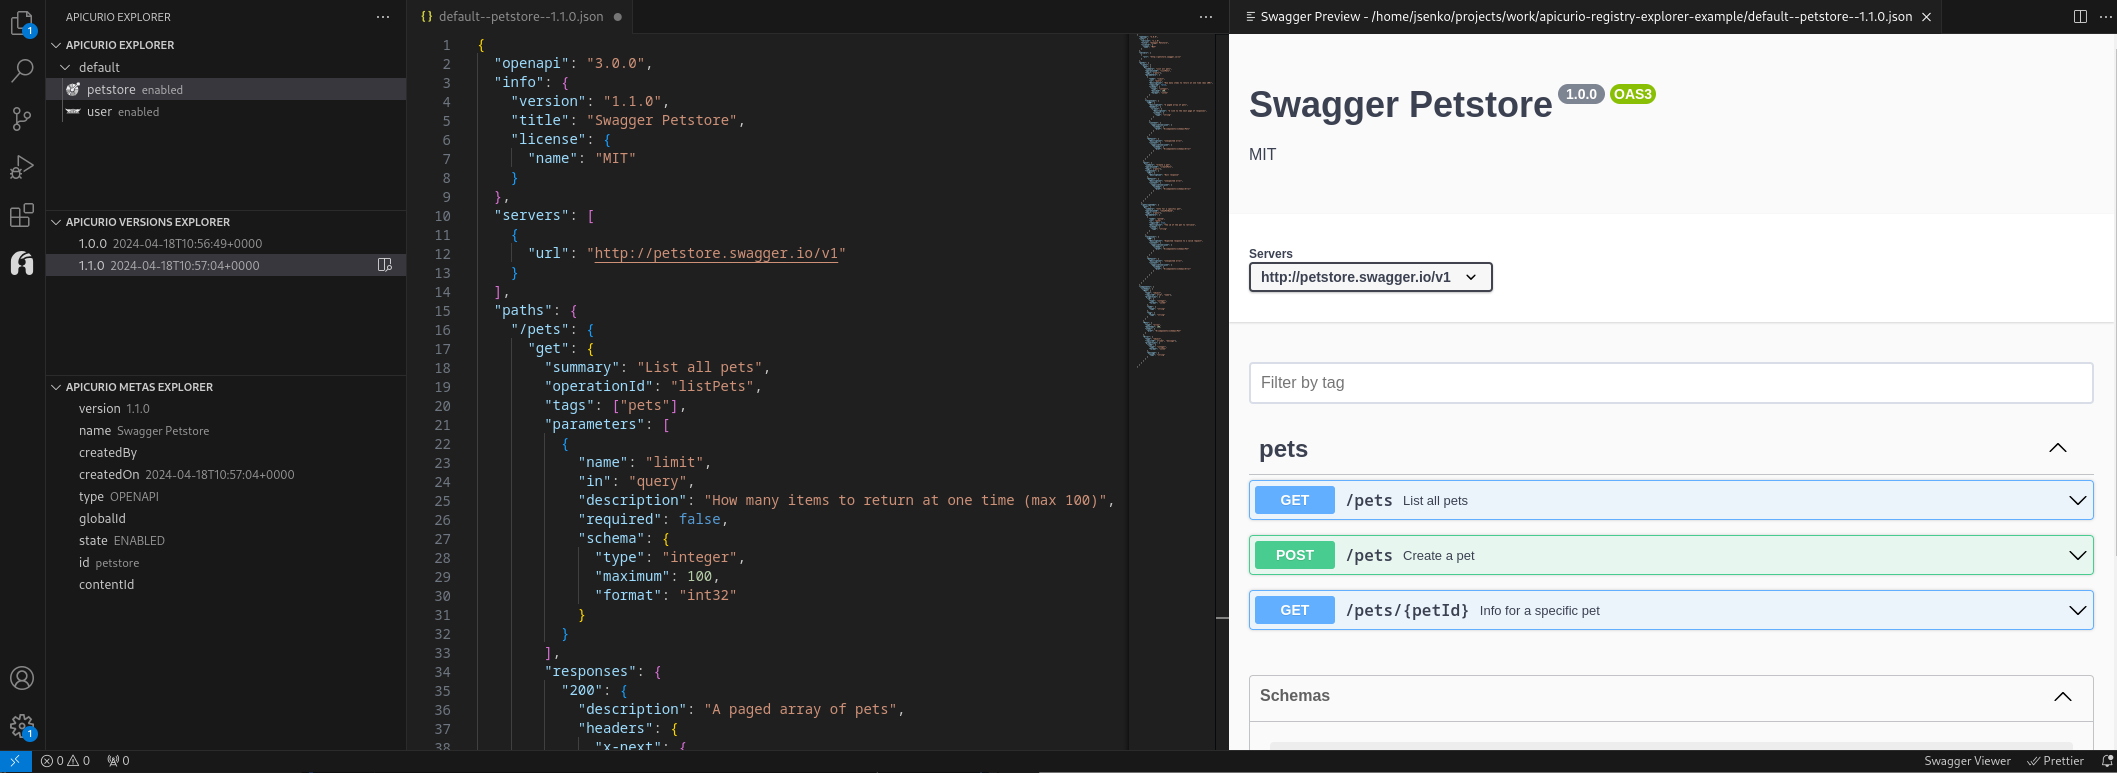 Integration with the Swagger Preview extension